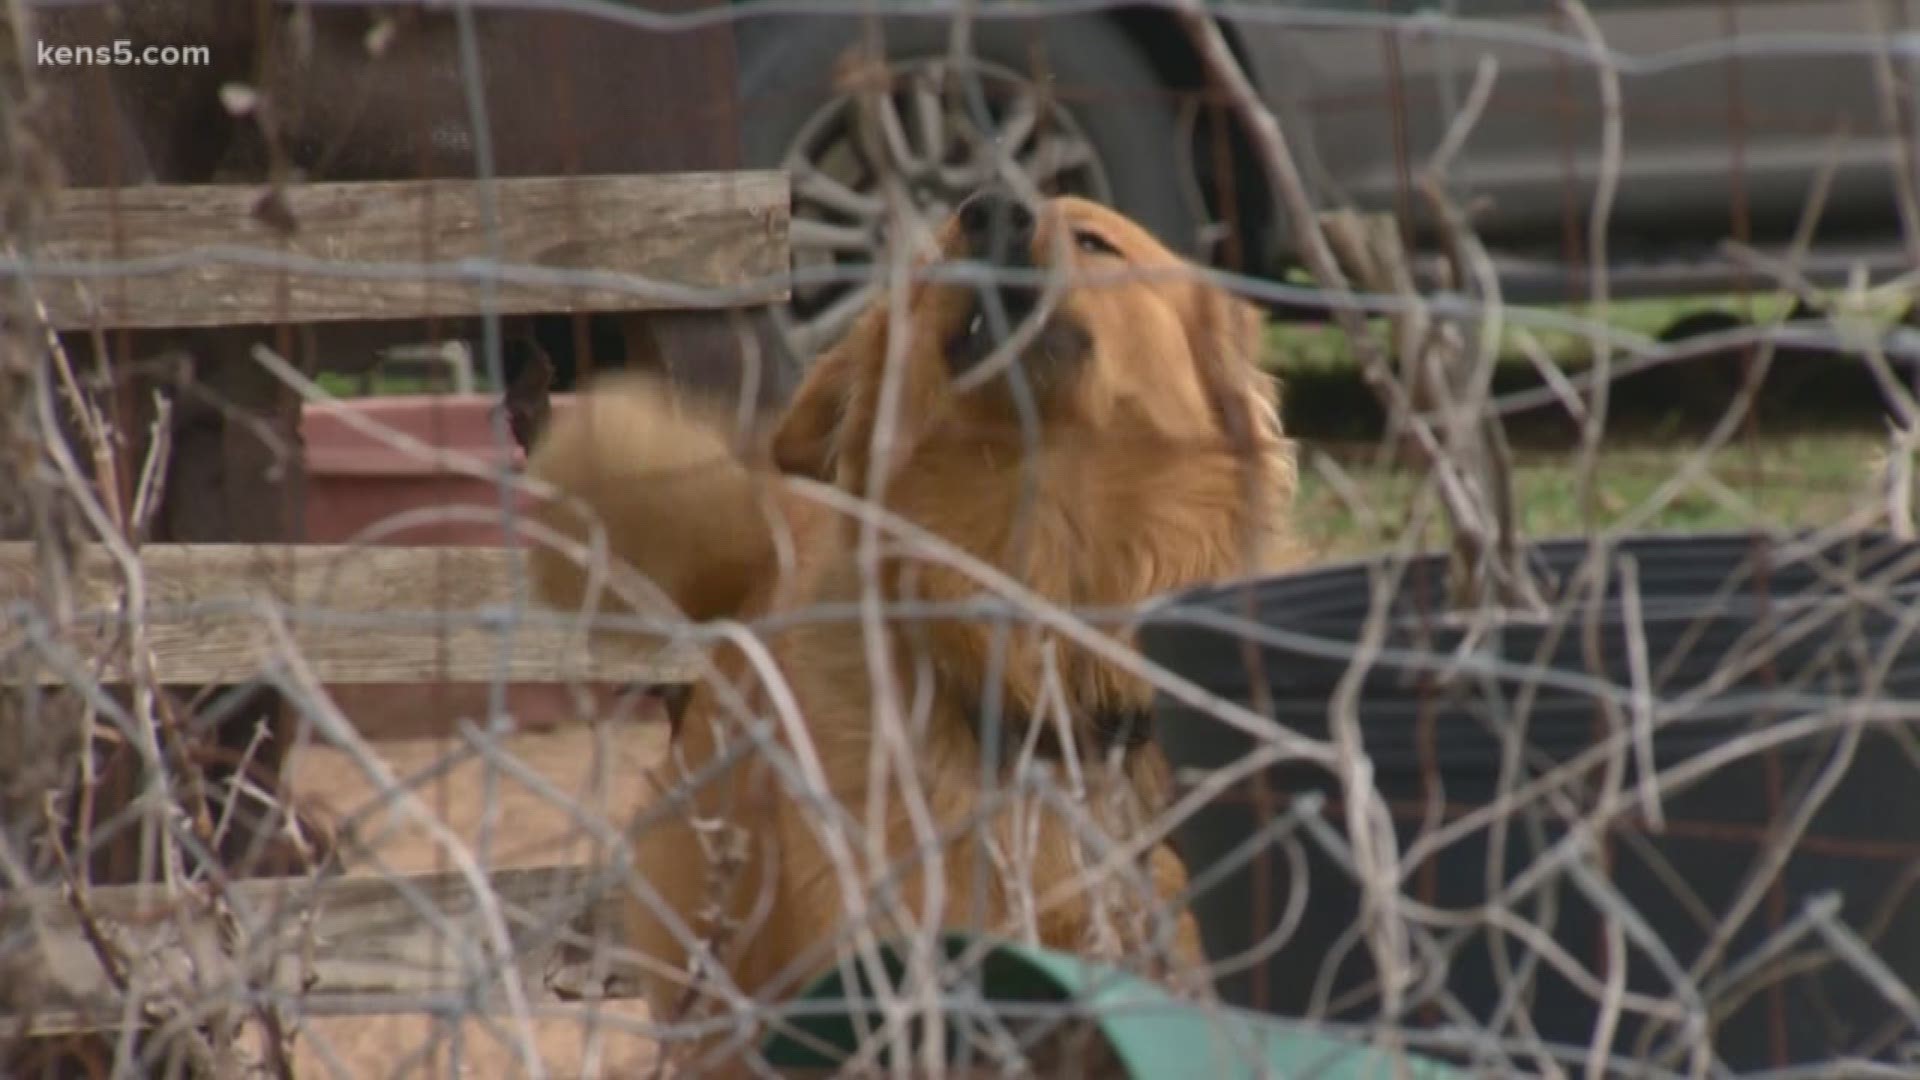 One Atascosa County resident says the evidence is clear that someone is shooting neighbors' dogs.